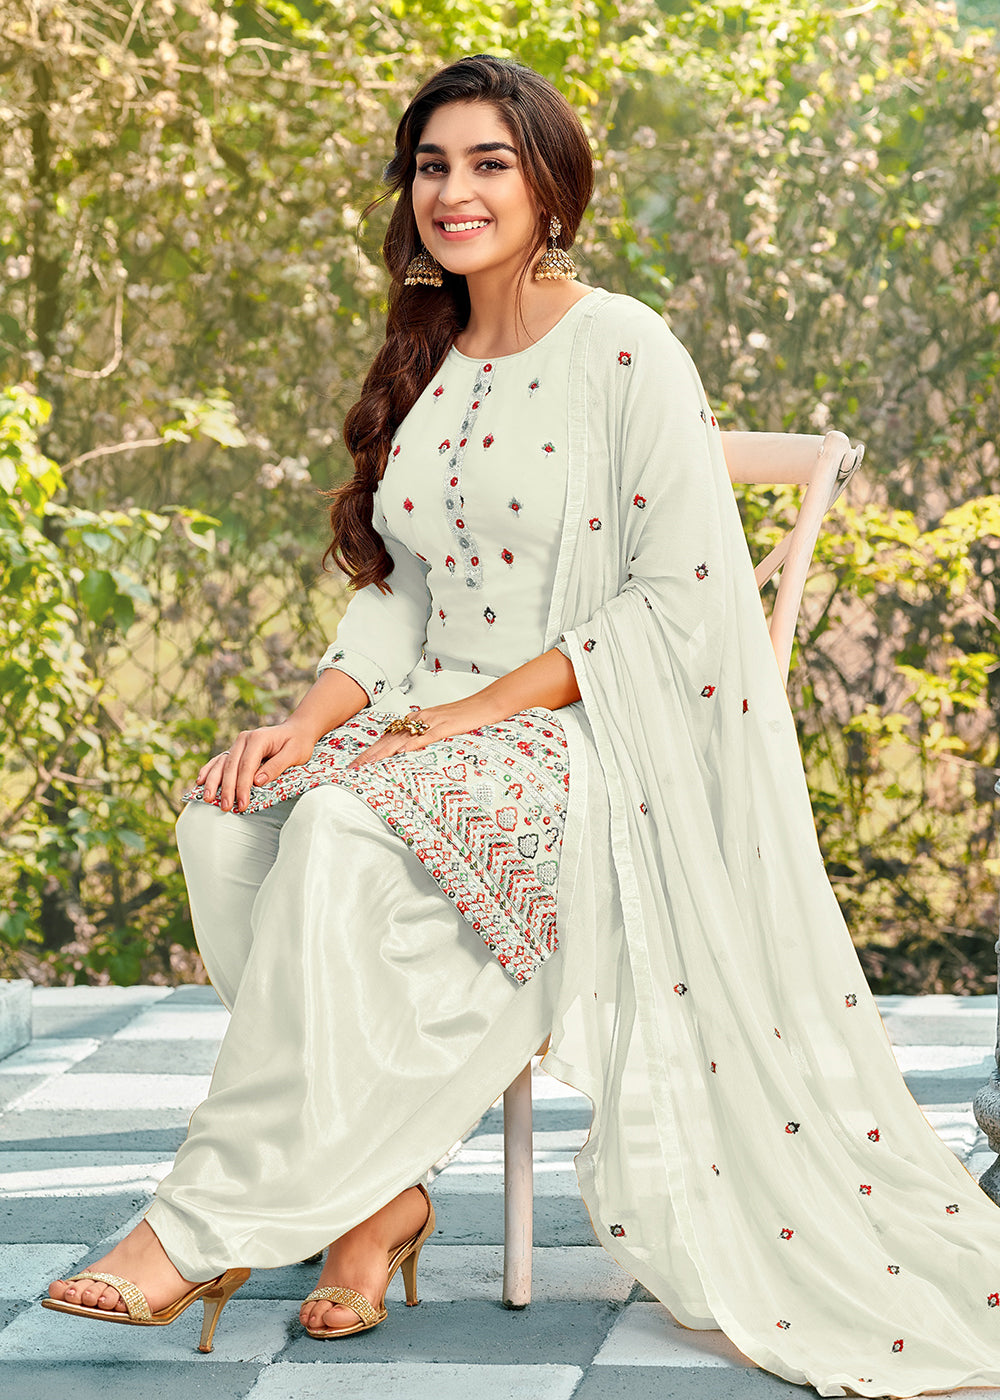 Buy Now Riveting White Punjabi Style Embroidered Georgette Patiala Suit Online in USA, UK, Canada, Germany, Australia & Worldwide at Empress Clothing.